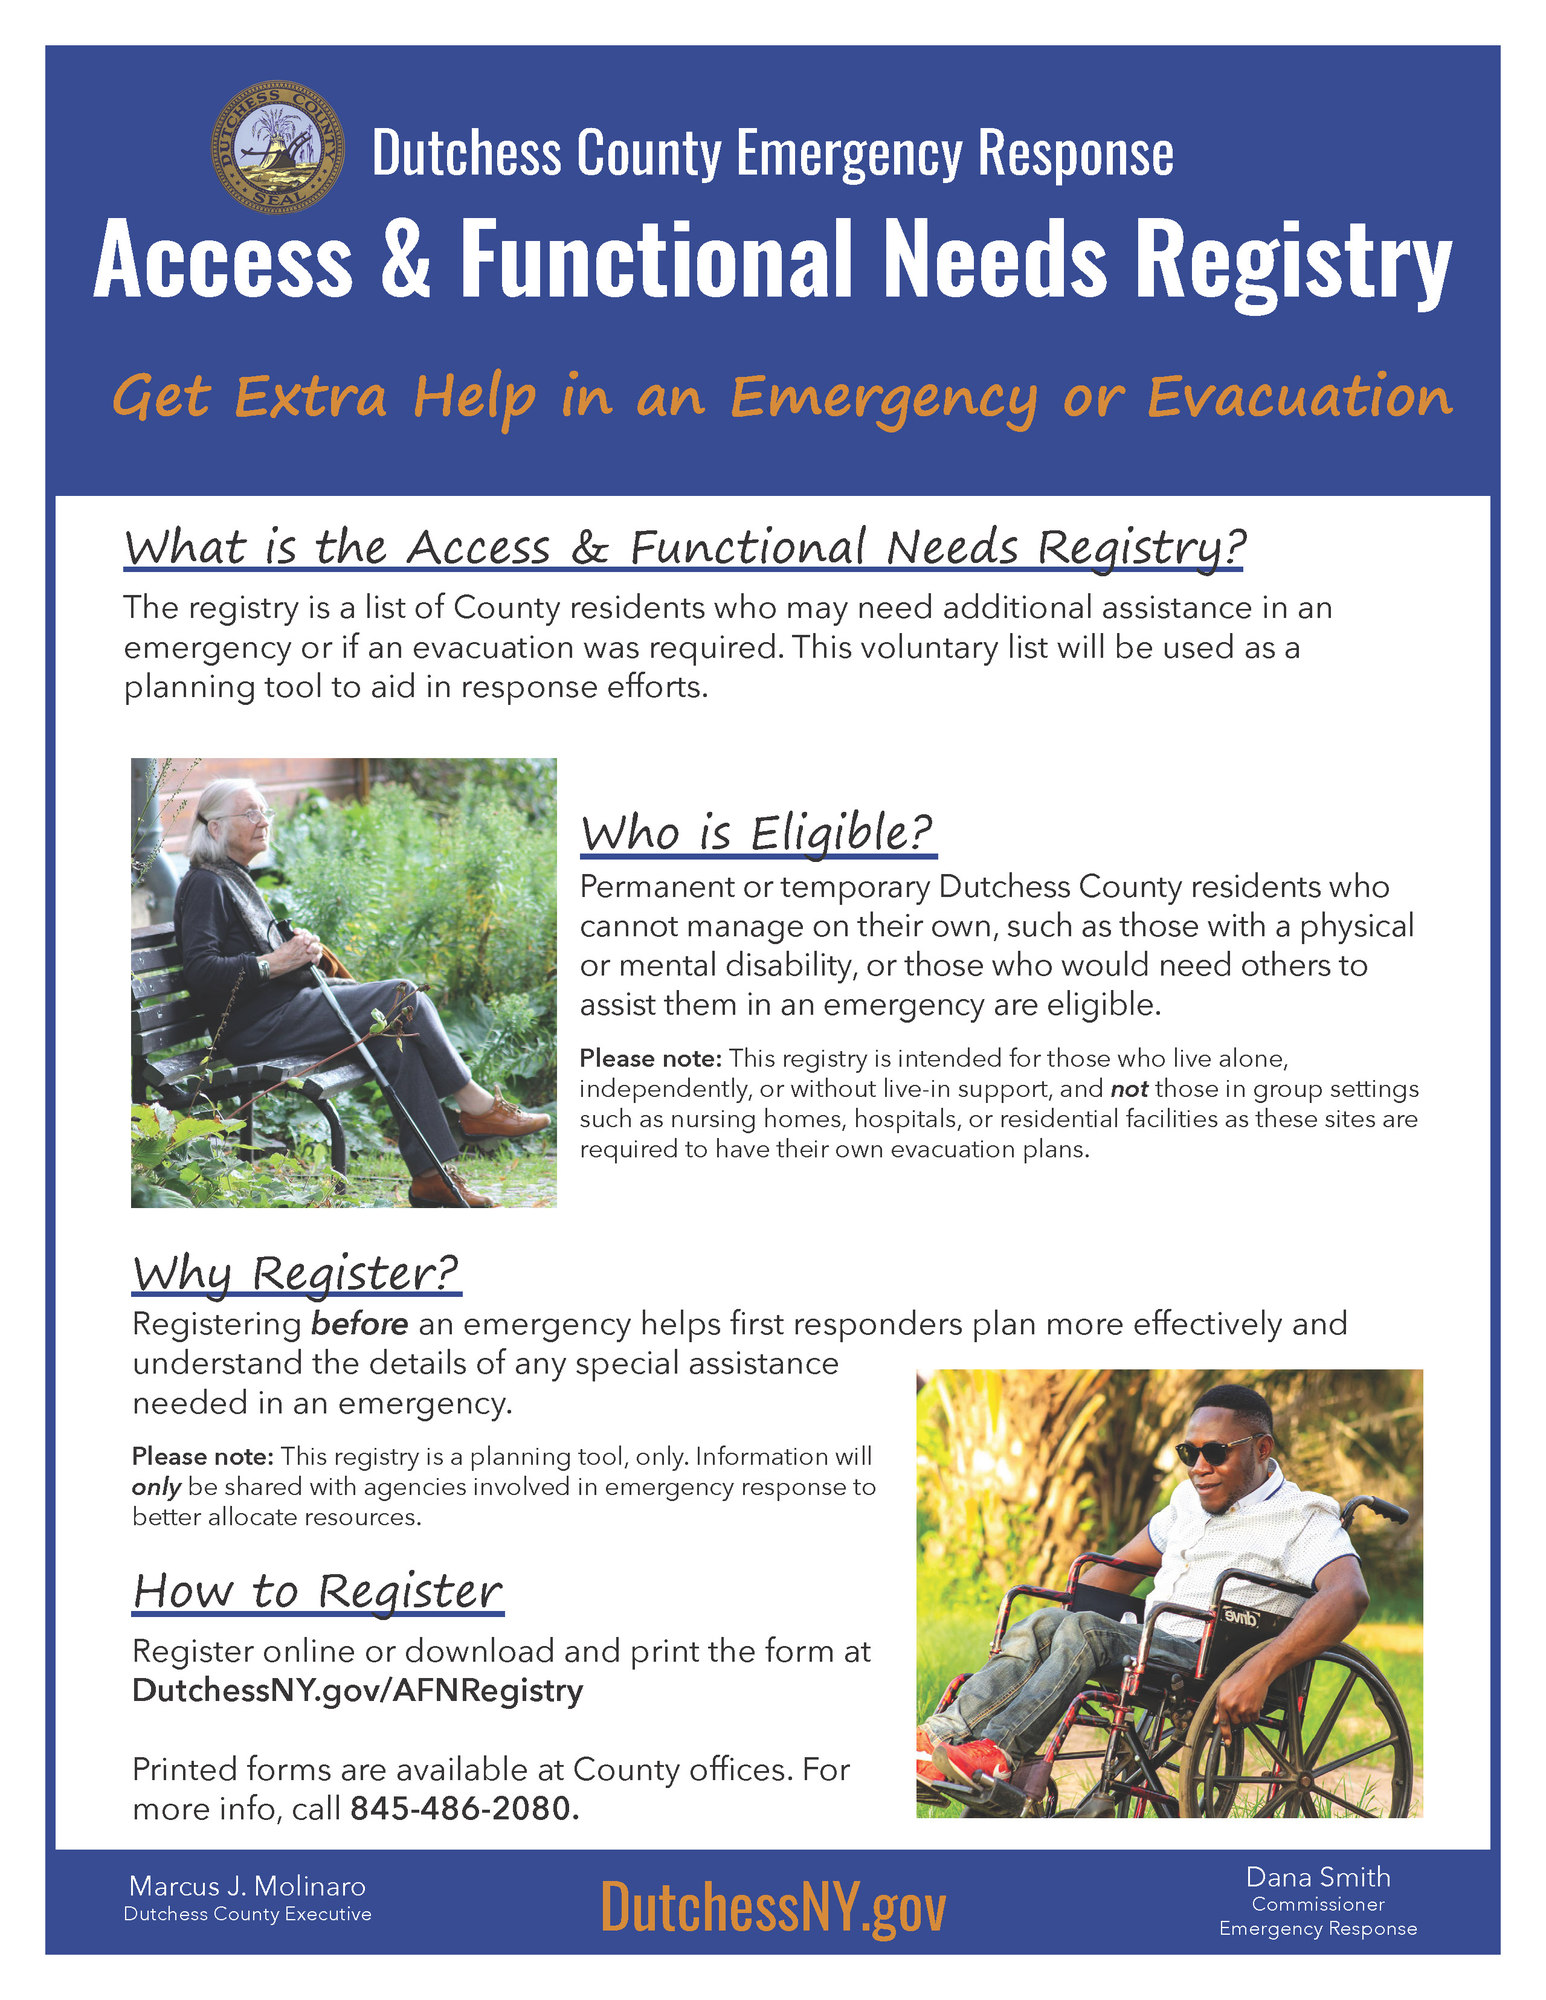 Access and Functional Needs Registry flyer